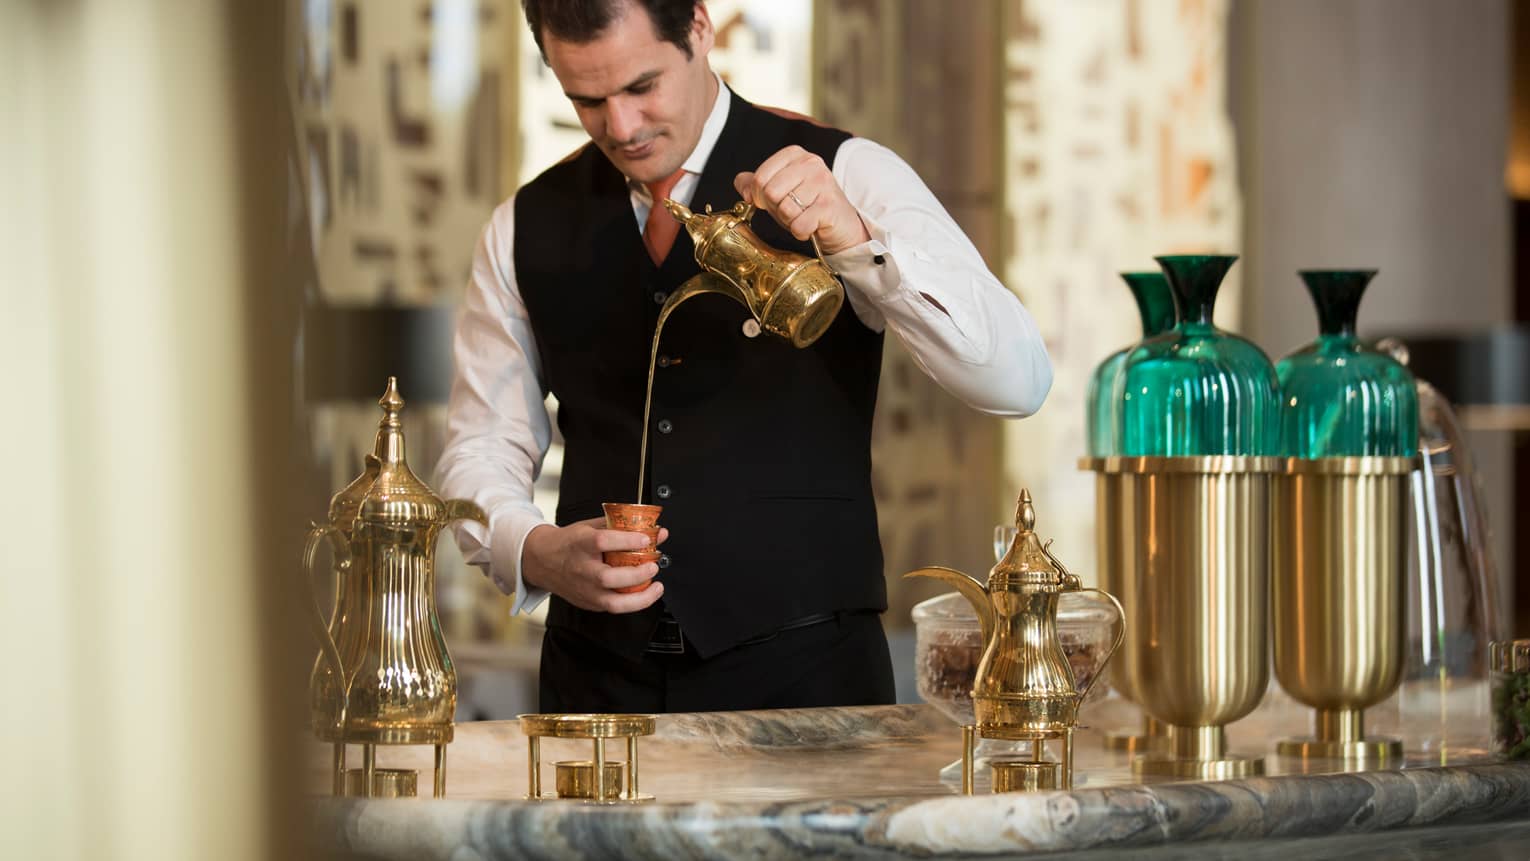 Hotel staff in vest, tie pours tea from brass pot into small cup